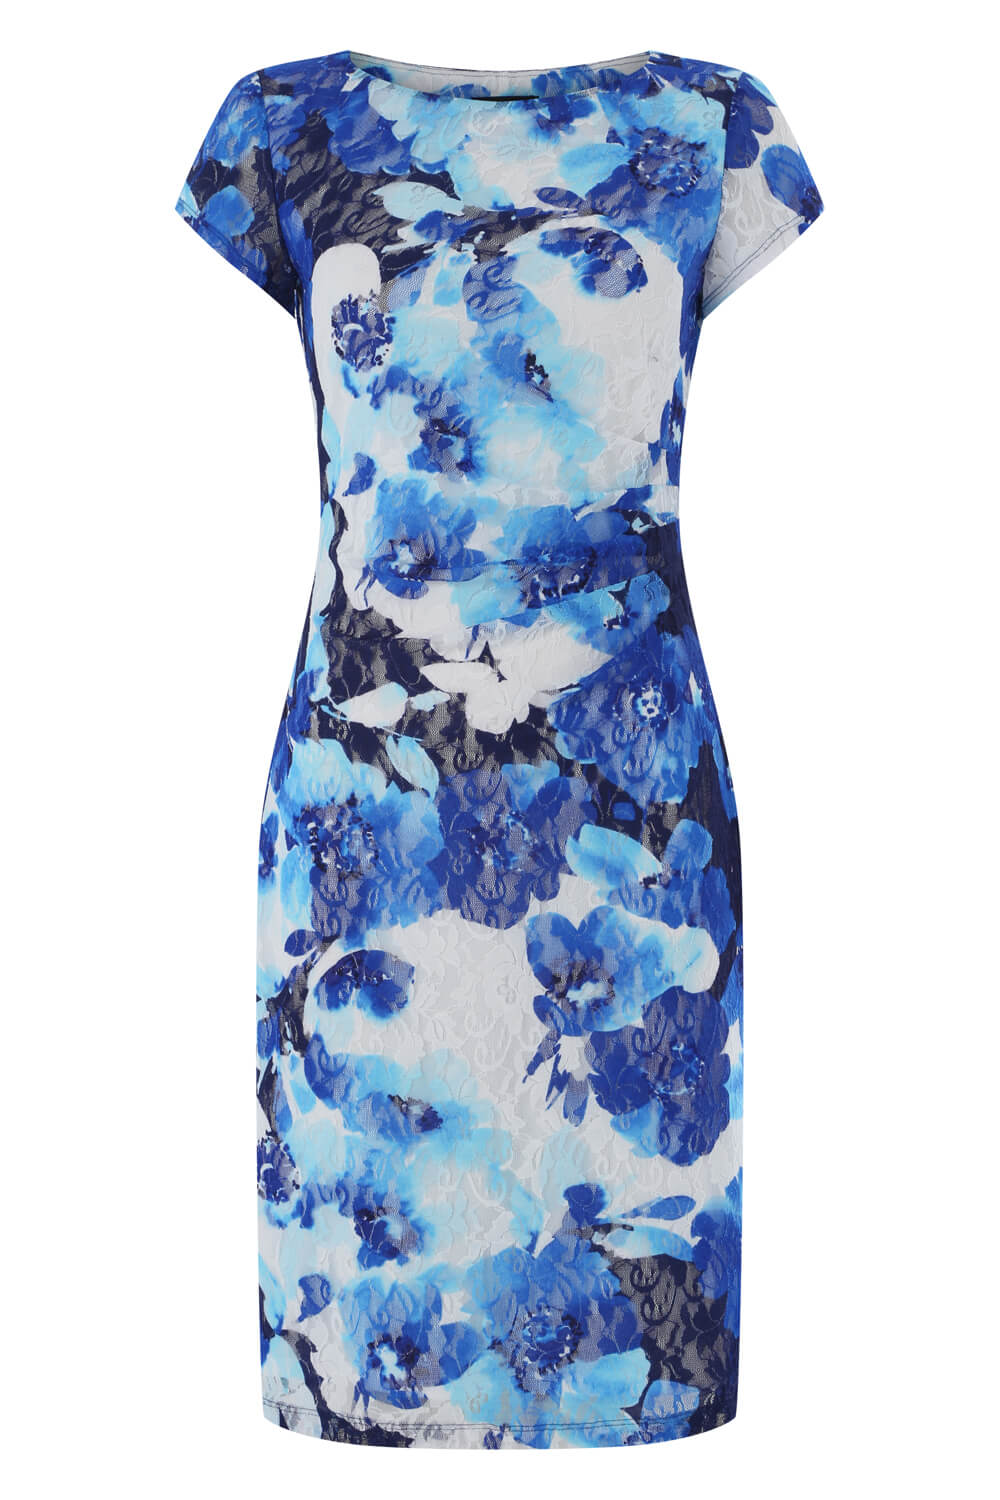 Royal Blue Floral Print Lace Ruched Dress, Image 4 of 4